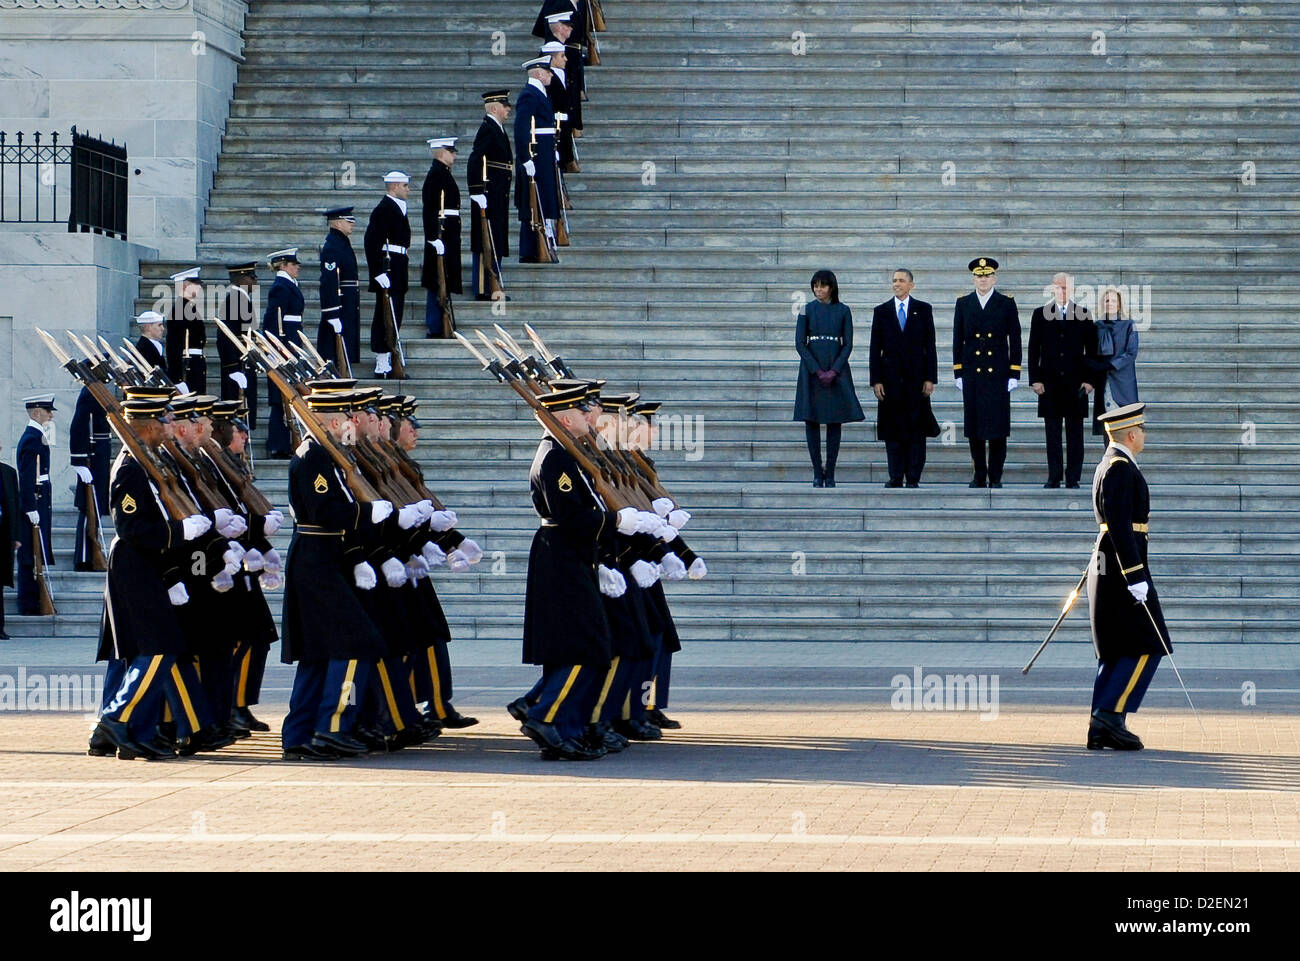 The US Army honor guard perform a pass and review as President Barack Obama, First Lady Michelle Obama, Vice President Joe Biden and wife Jill Biden depart the US Capitol for the Inauguration Parade down Pennsylvania Avenue to the White House January 21, 2013 in Washington, DC. Stock Photo